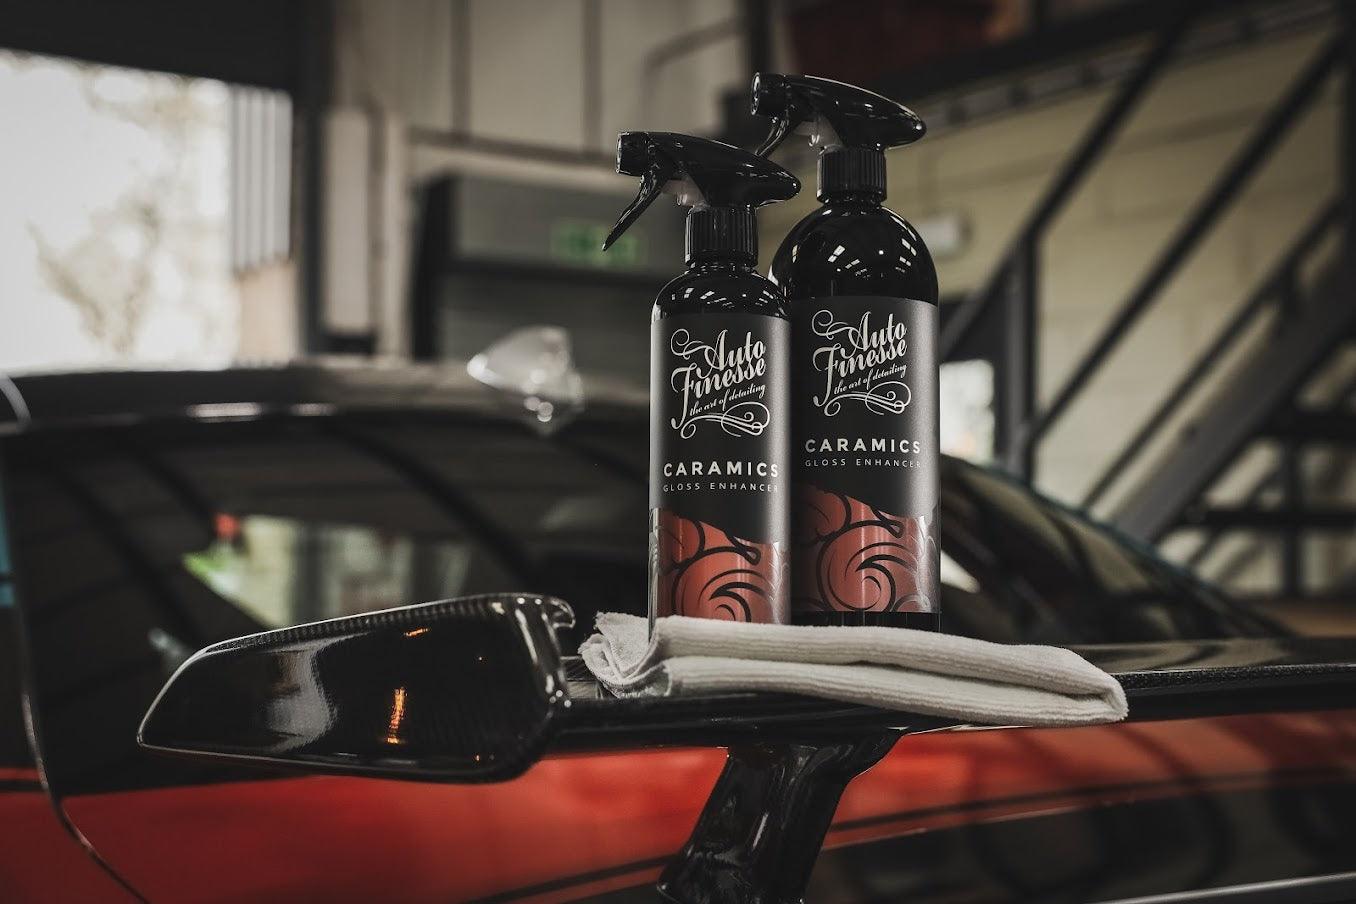 Unboxing Blackline Car Cares New Detailing Products ! #detailing #carc